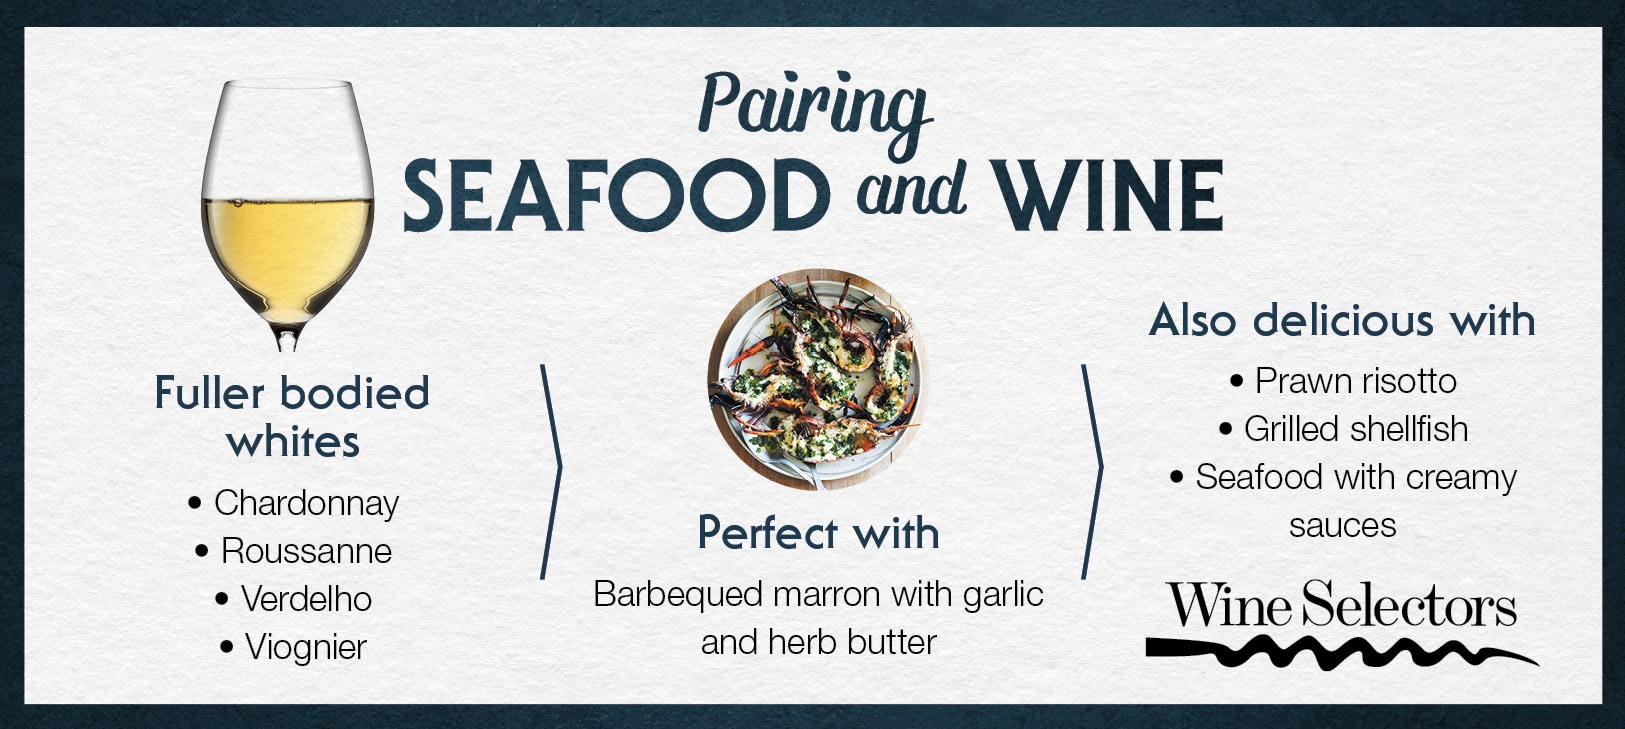 Fuller bodied white wines pair well with seafood in creamy sauces - infographic